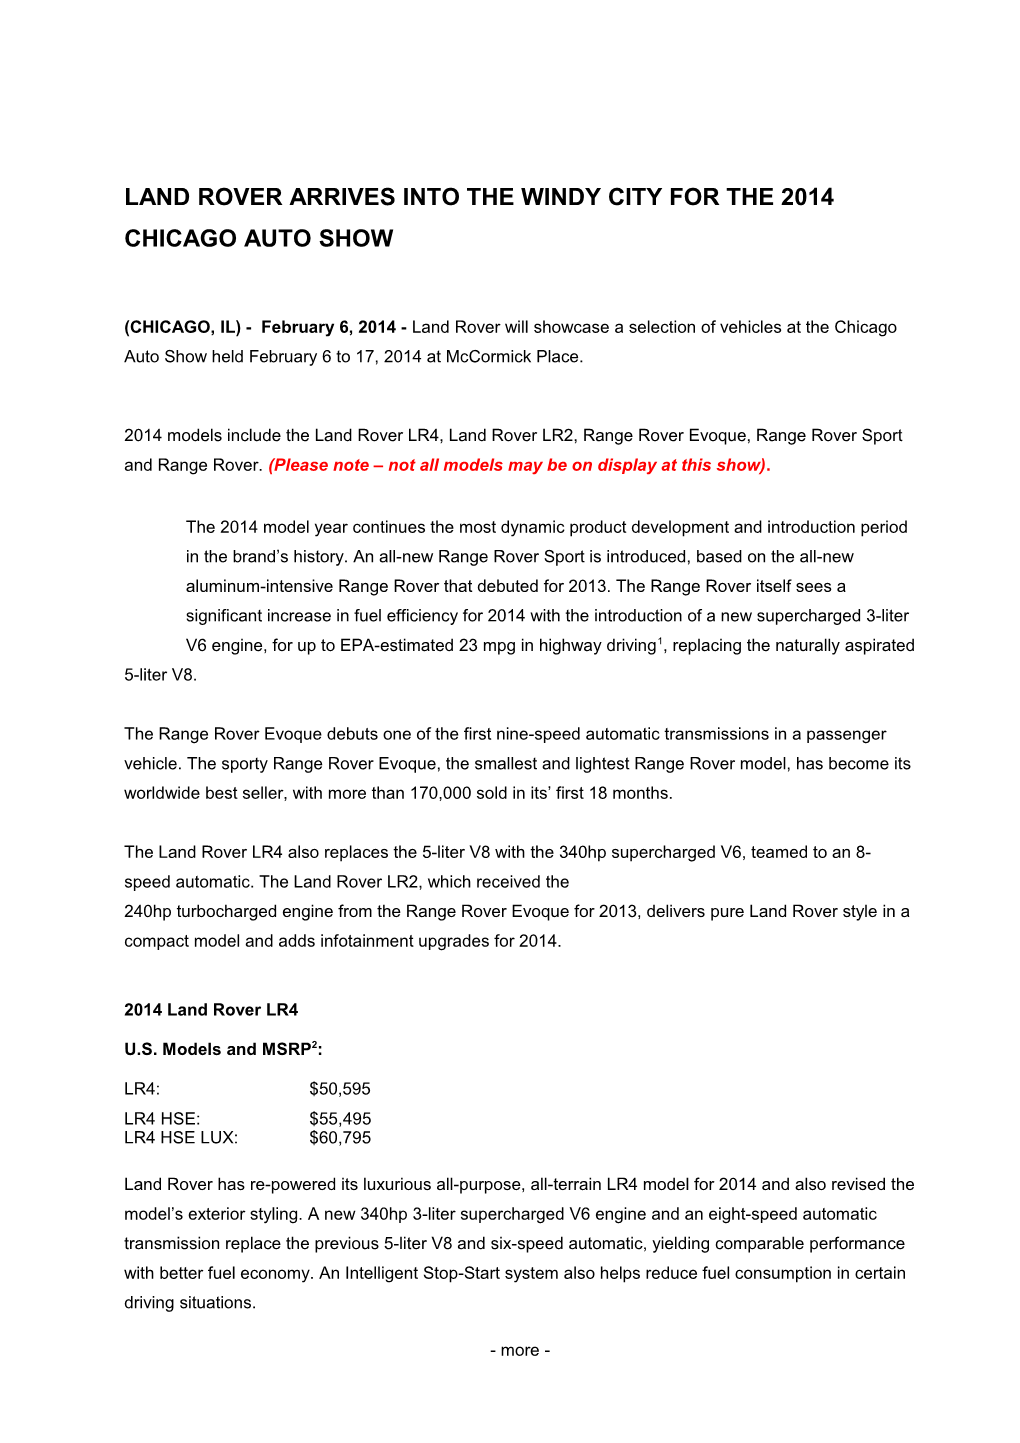 Land Rover Arrives Into the Windy Cityfor the 2014 Chicago Auto Show